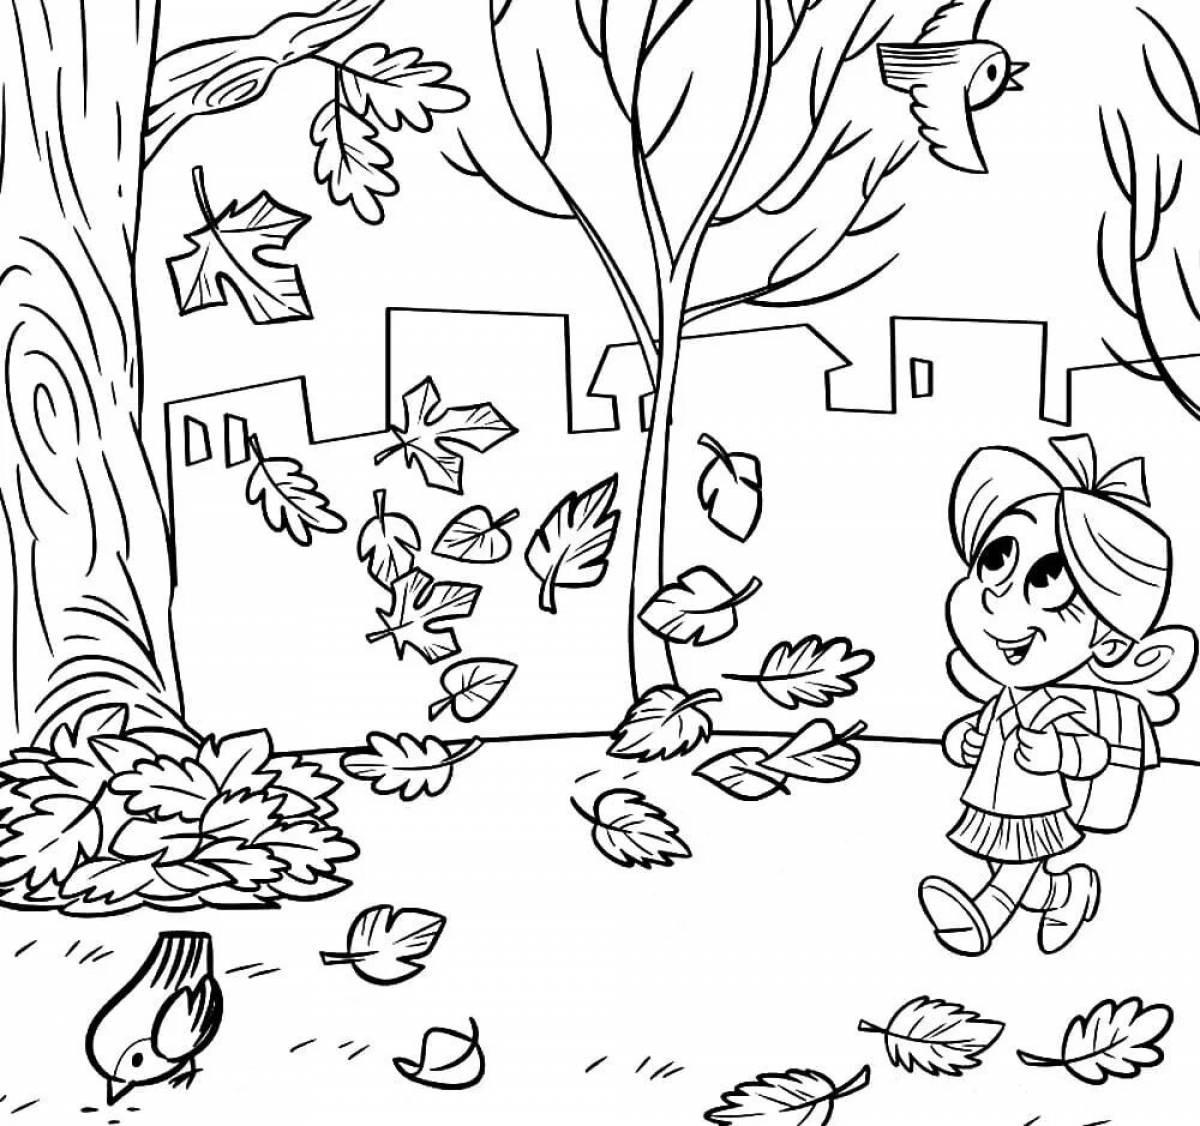 Festive autumn coloring book for children 6-7 years old